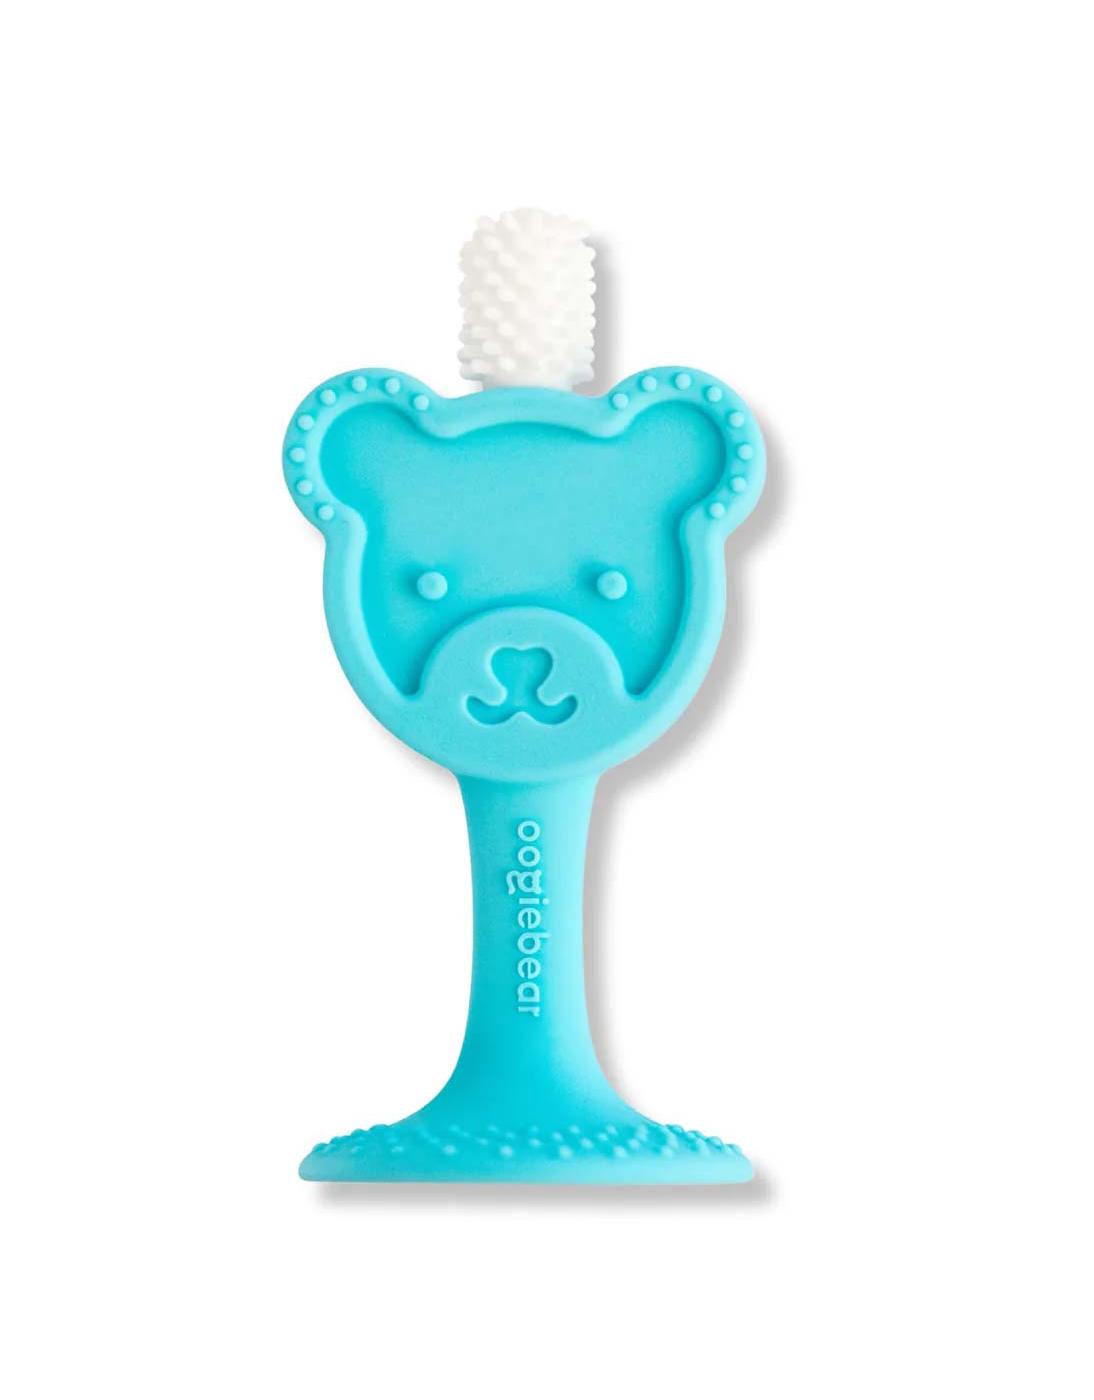 Oogiebear 360 Infant to Toddler Training Toothbrush; image 1 of 7